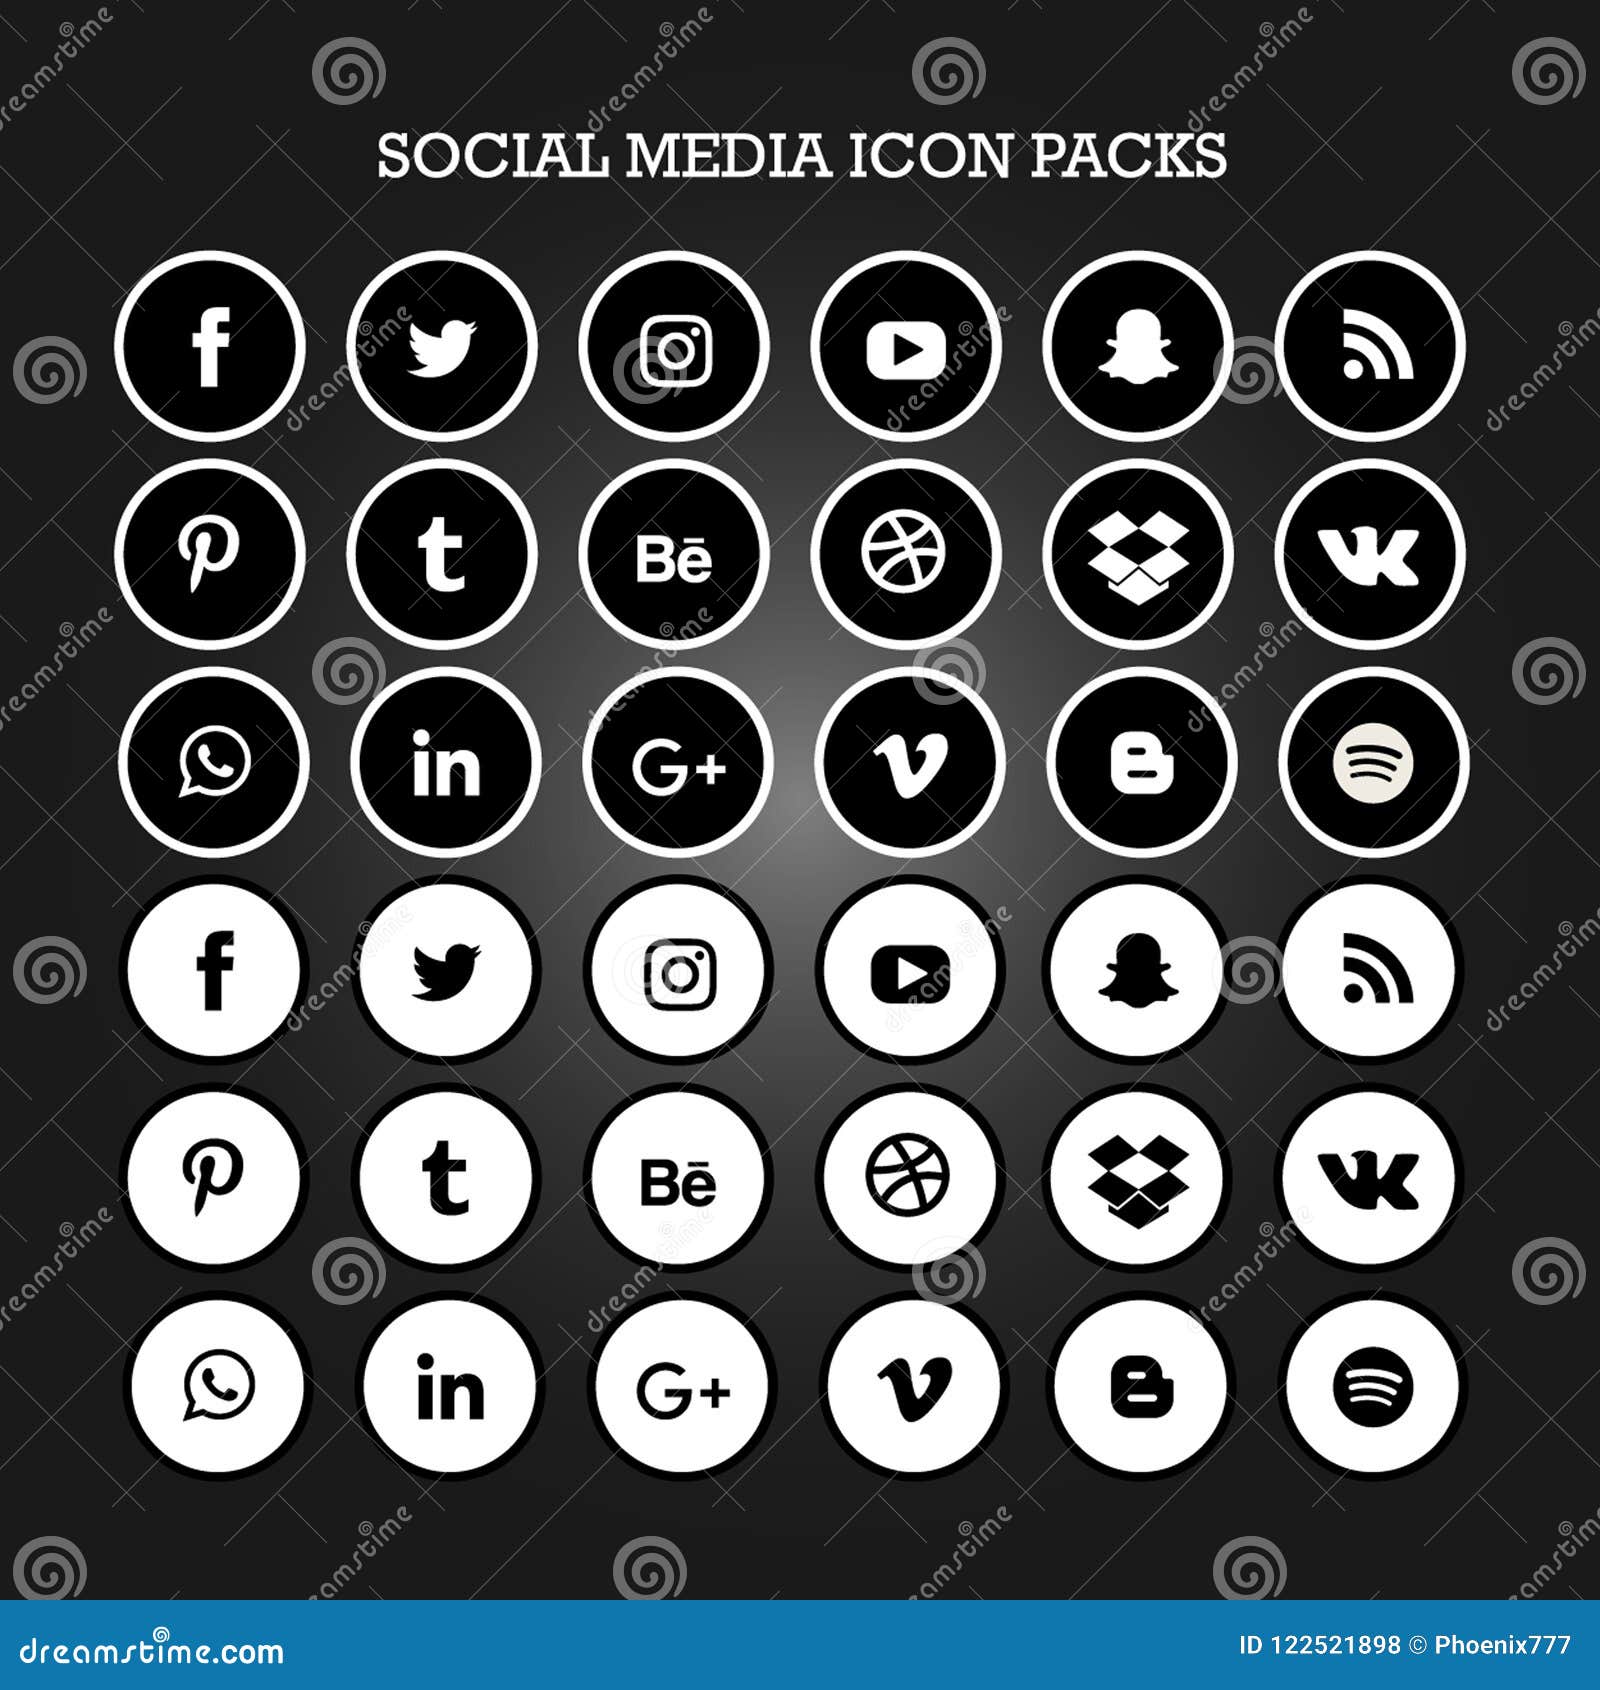 Social Media Icon Packs Circle Flat Black And White Editorial Stock Photo Illustration Of Packs Networking